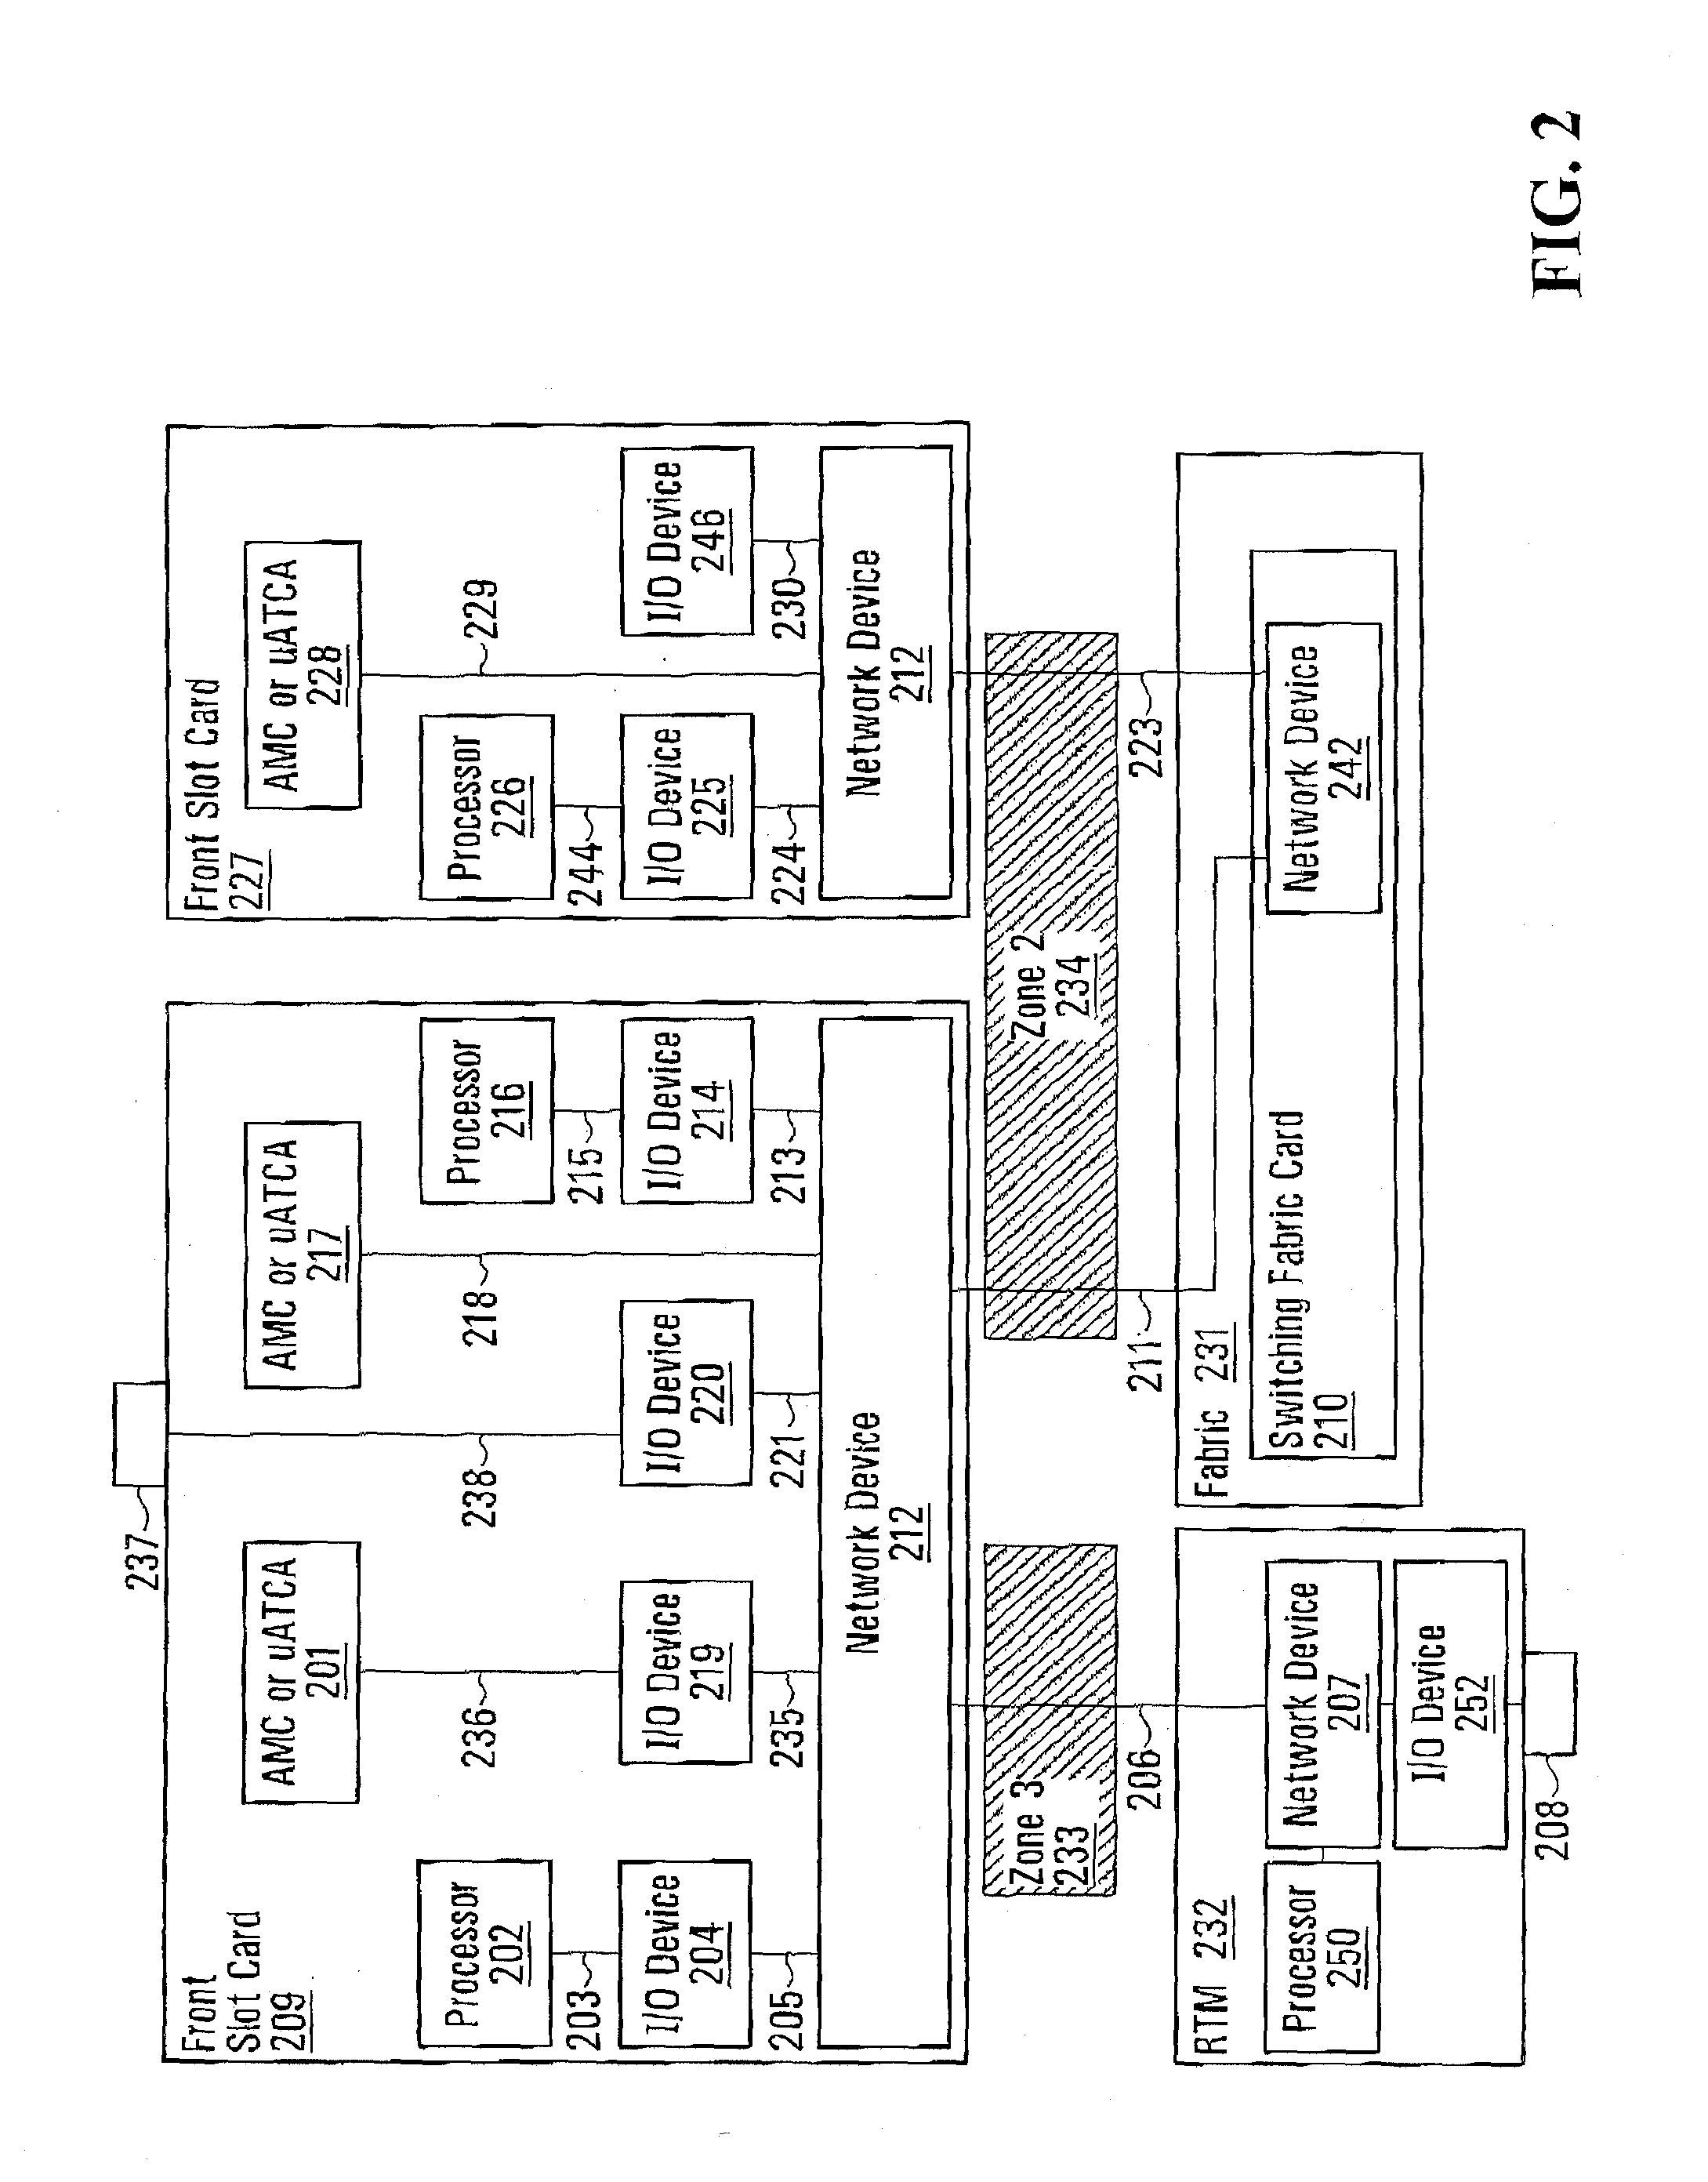 Methods and Systems for Providing a Logical Network Layer for Delivery of Input/Output Data